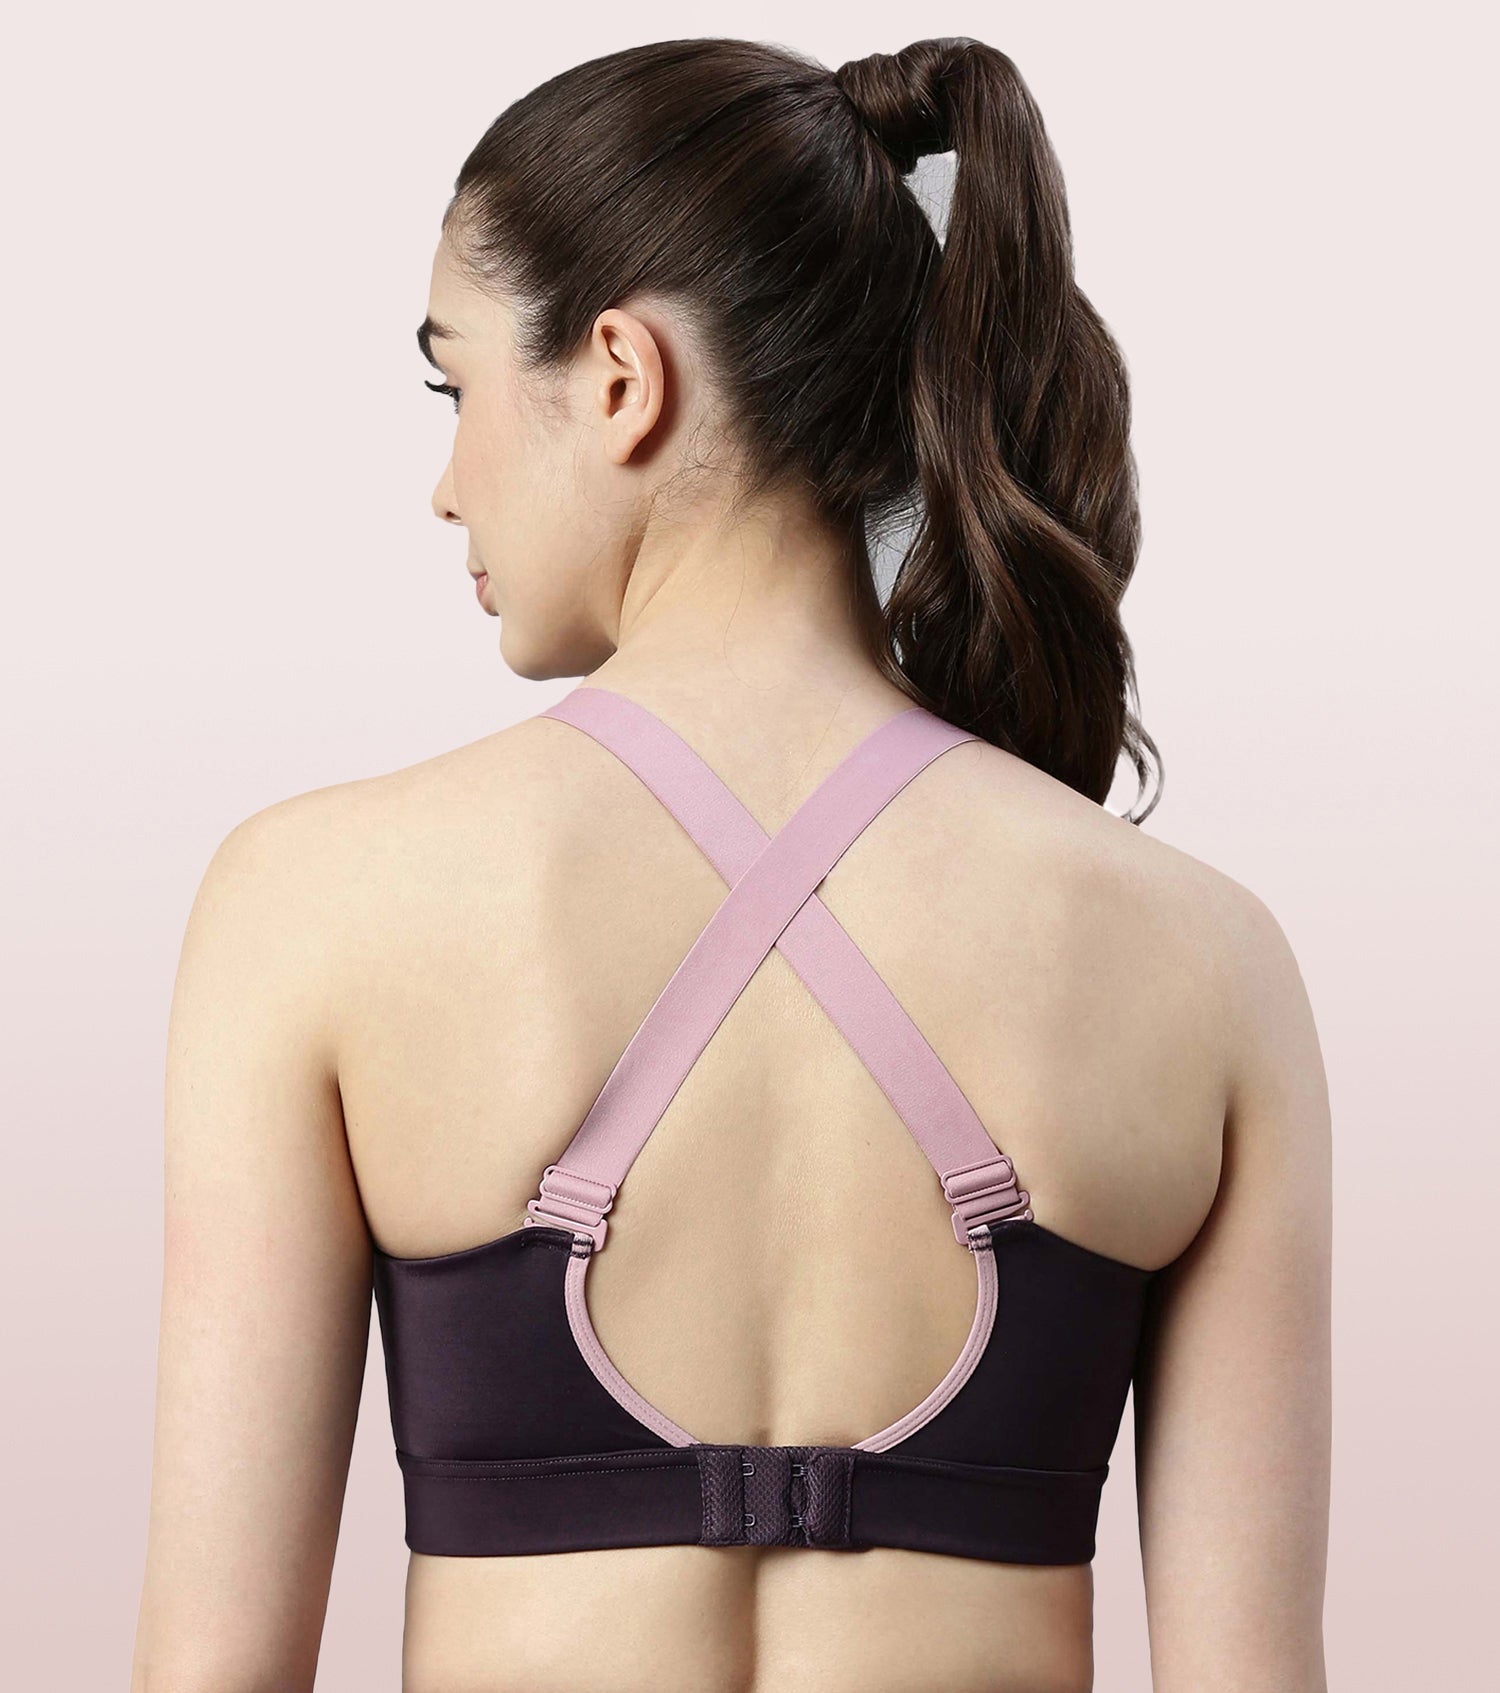 Enamor SB11 High Impact Sports Bra - Padded Wirefree Front Zipper - Pink 32D  in Navi-Mumbai at best price by Virasa Apparels - Justdial